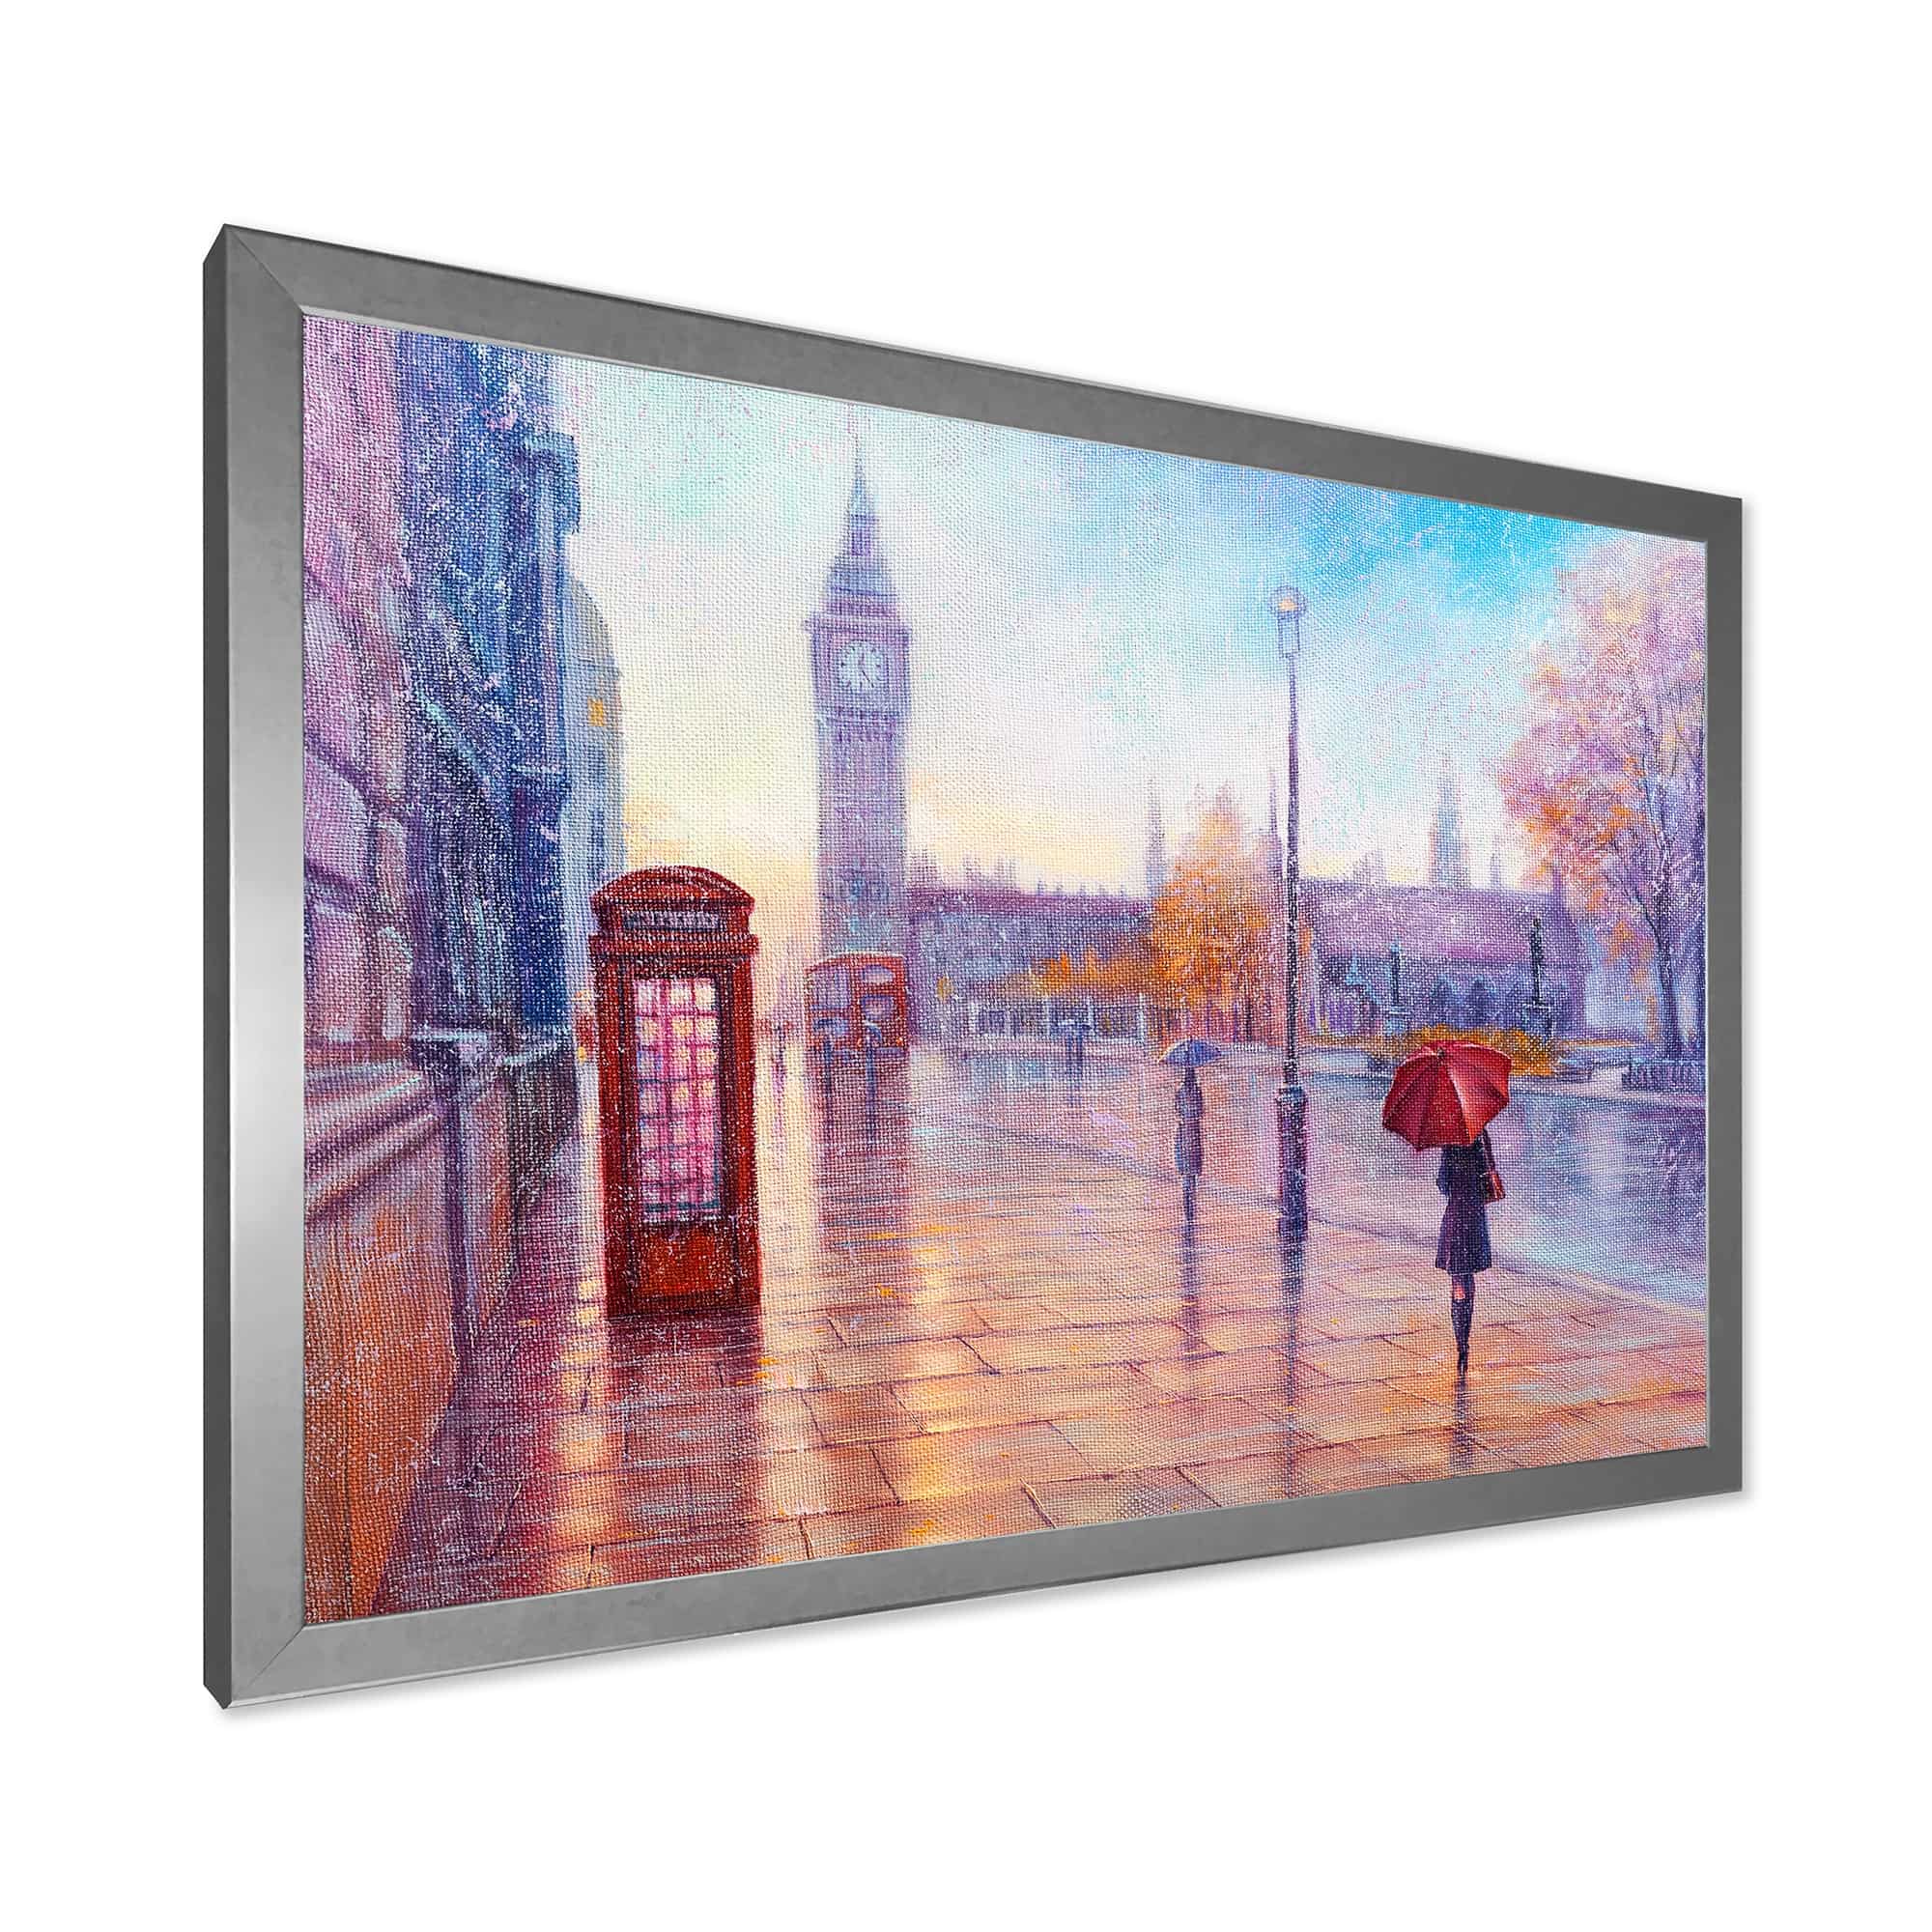 Designart "Big Ben and Woman With Red Umbrella In London" French Country Framed Art Print